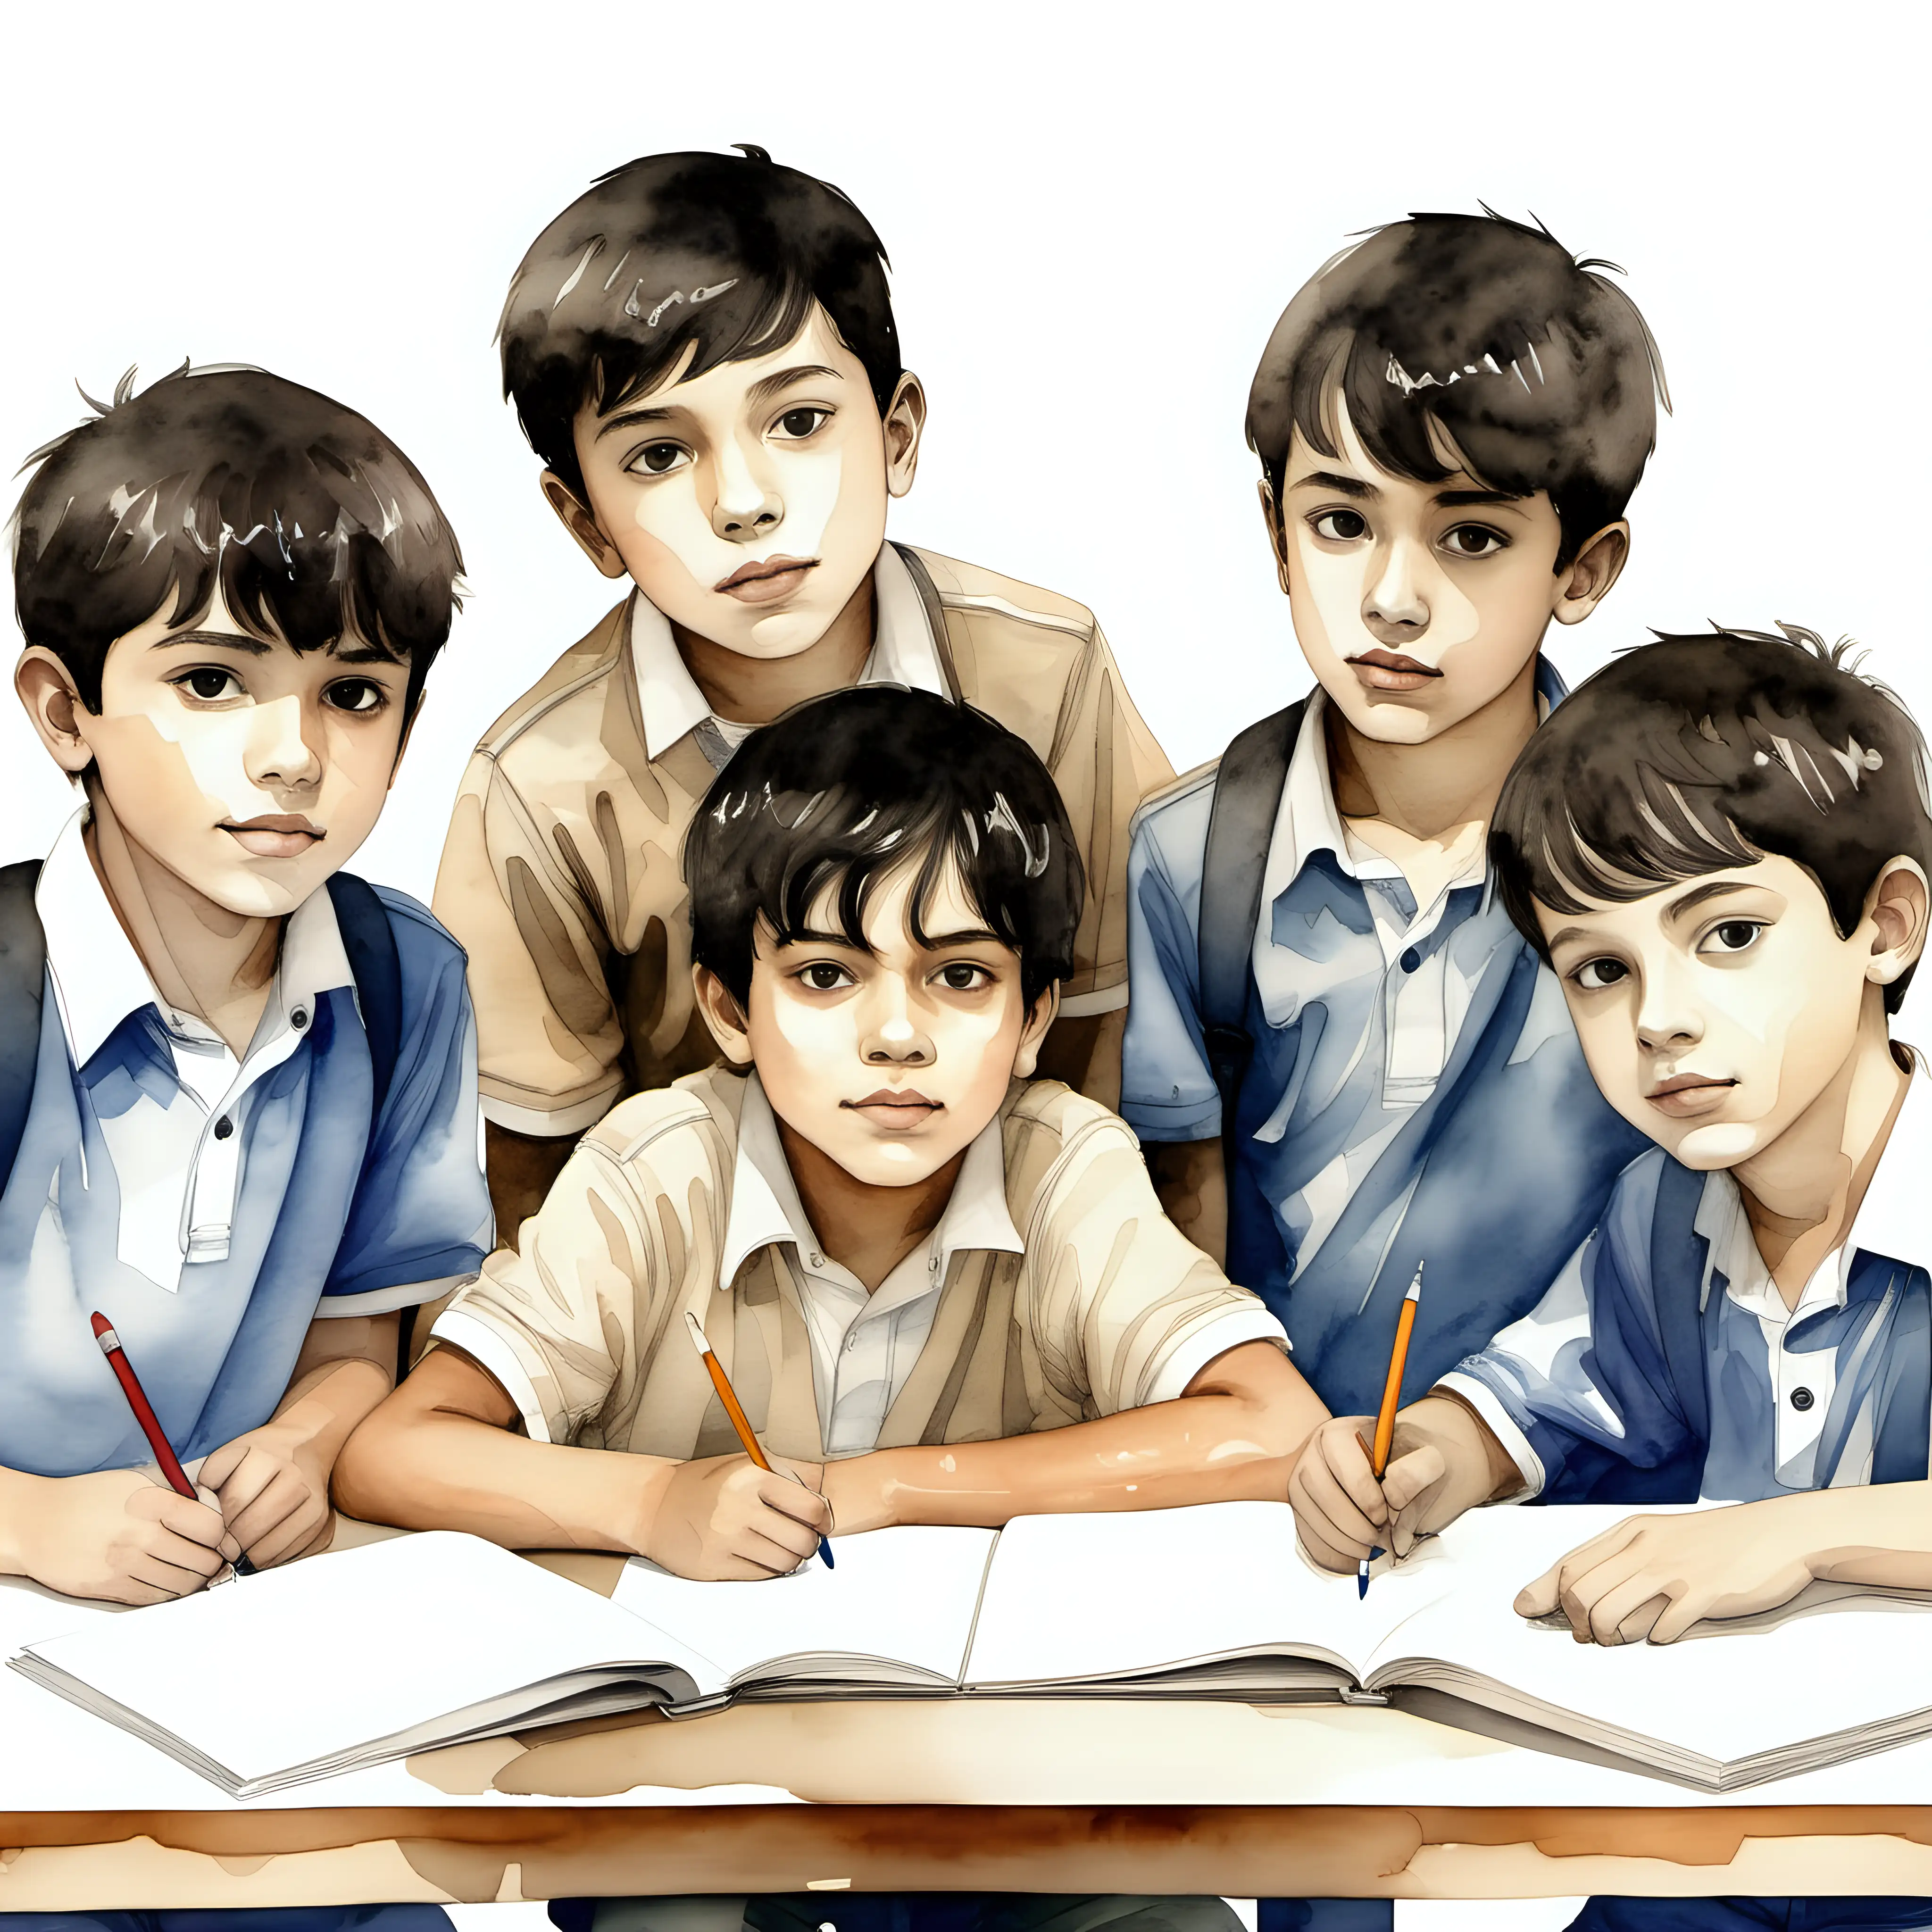 Diverse Group of Boys in Classroom Watercolored Art with Dark Hair and Beige Skin